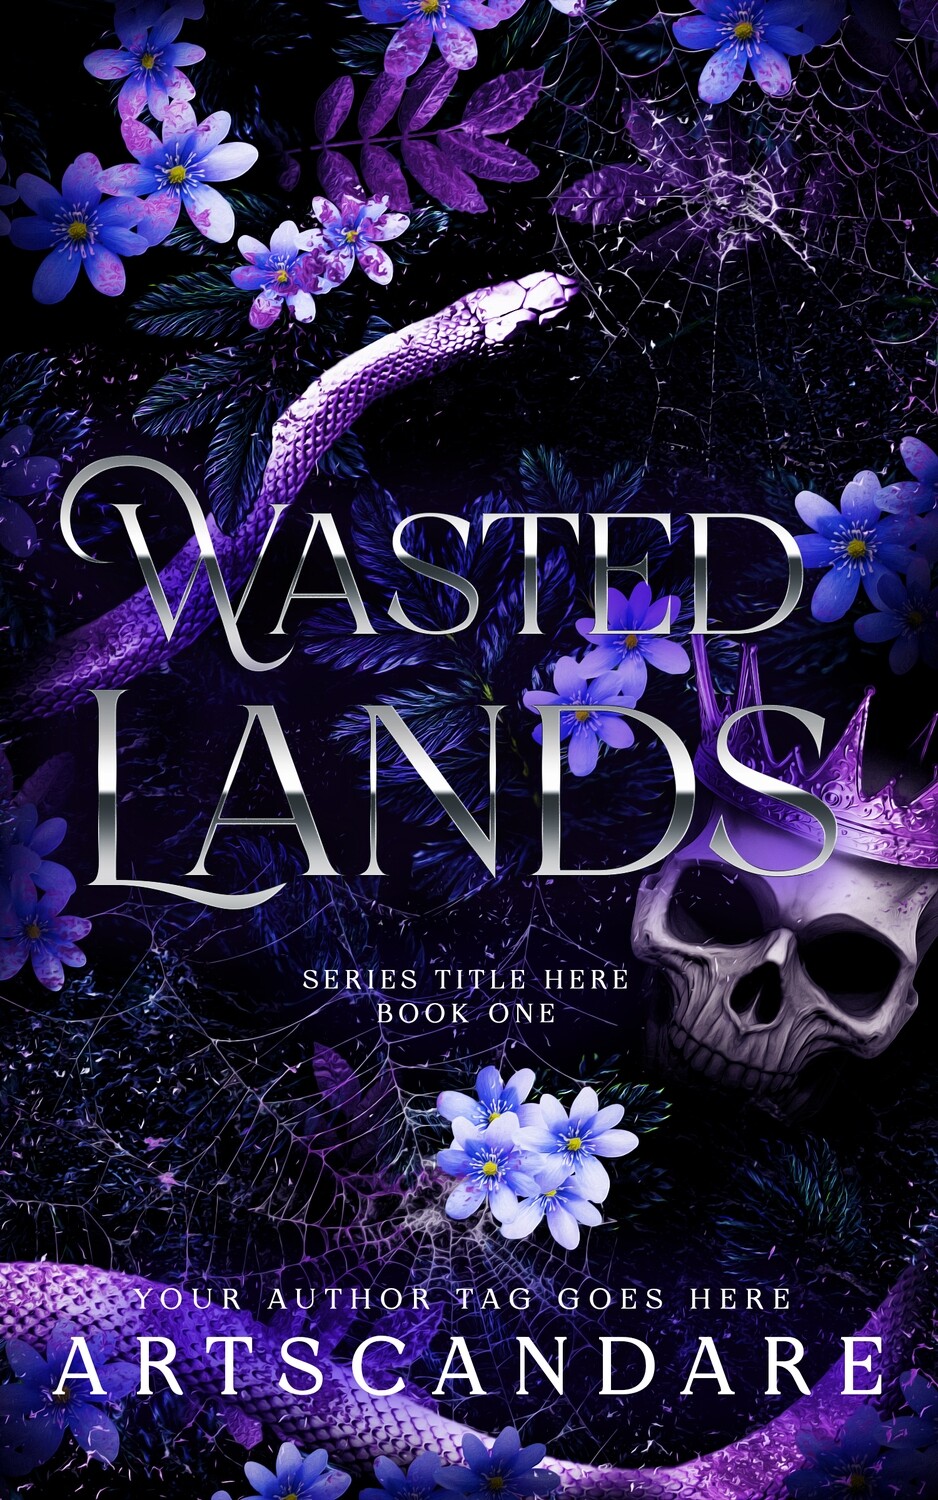 WASTED LANDS